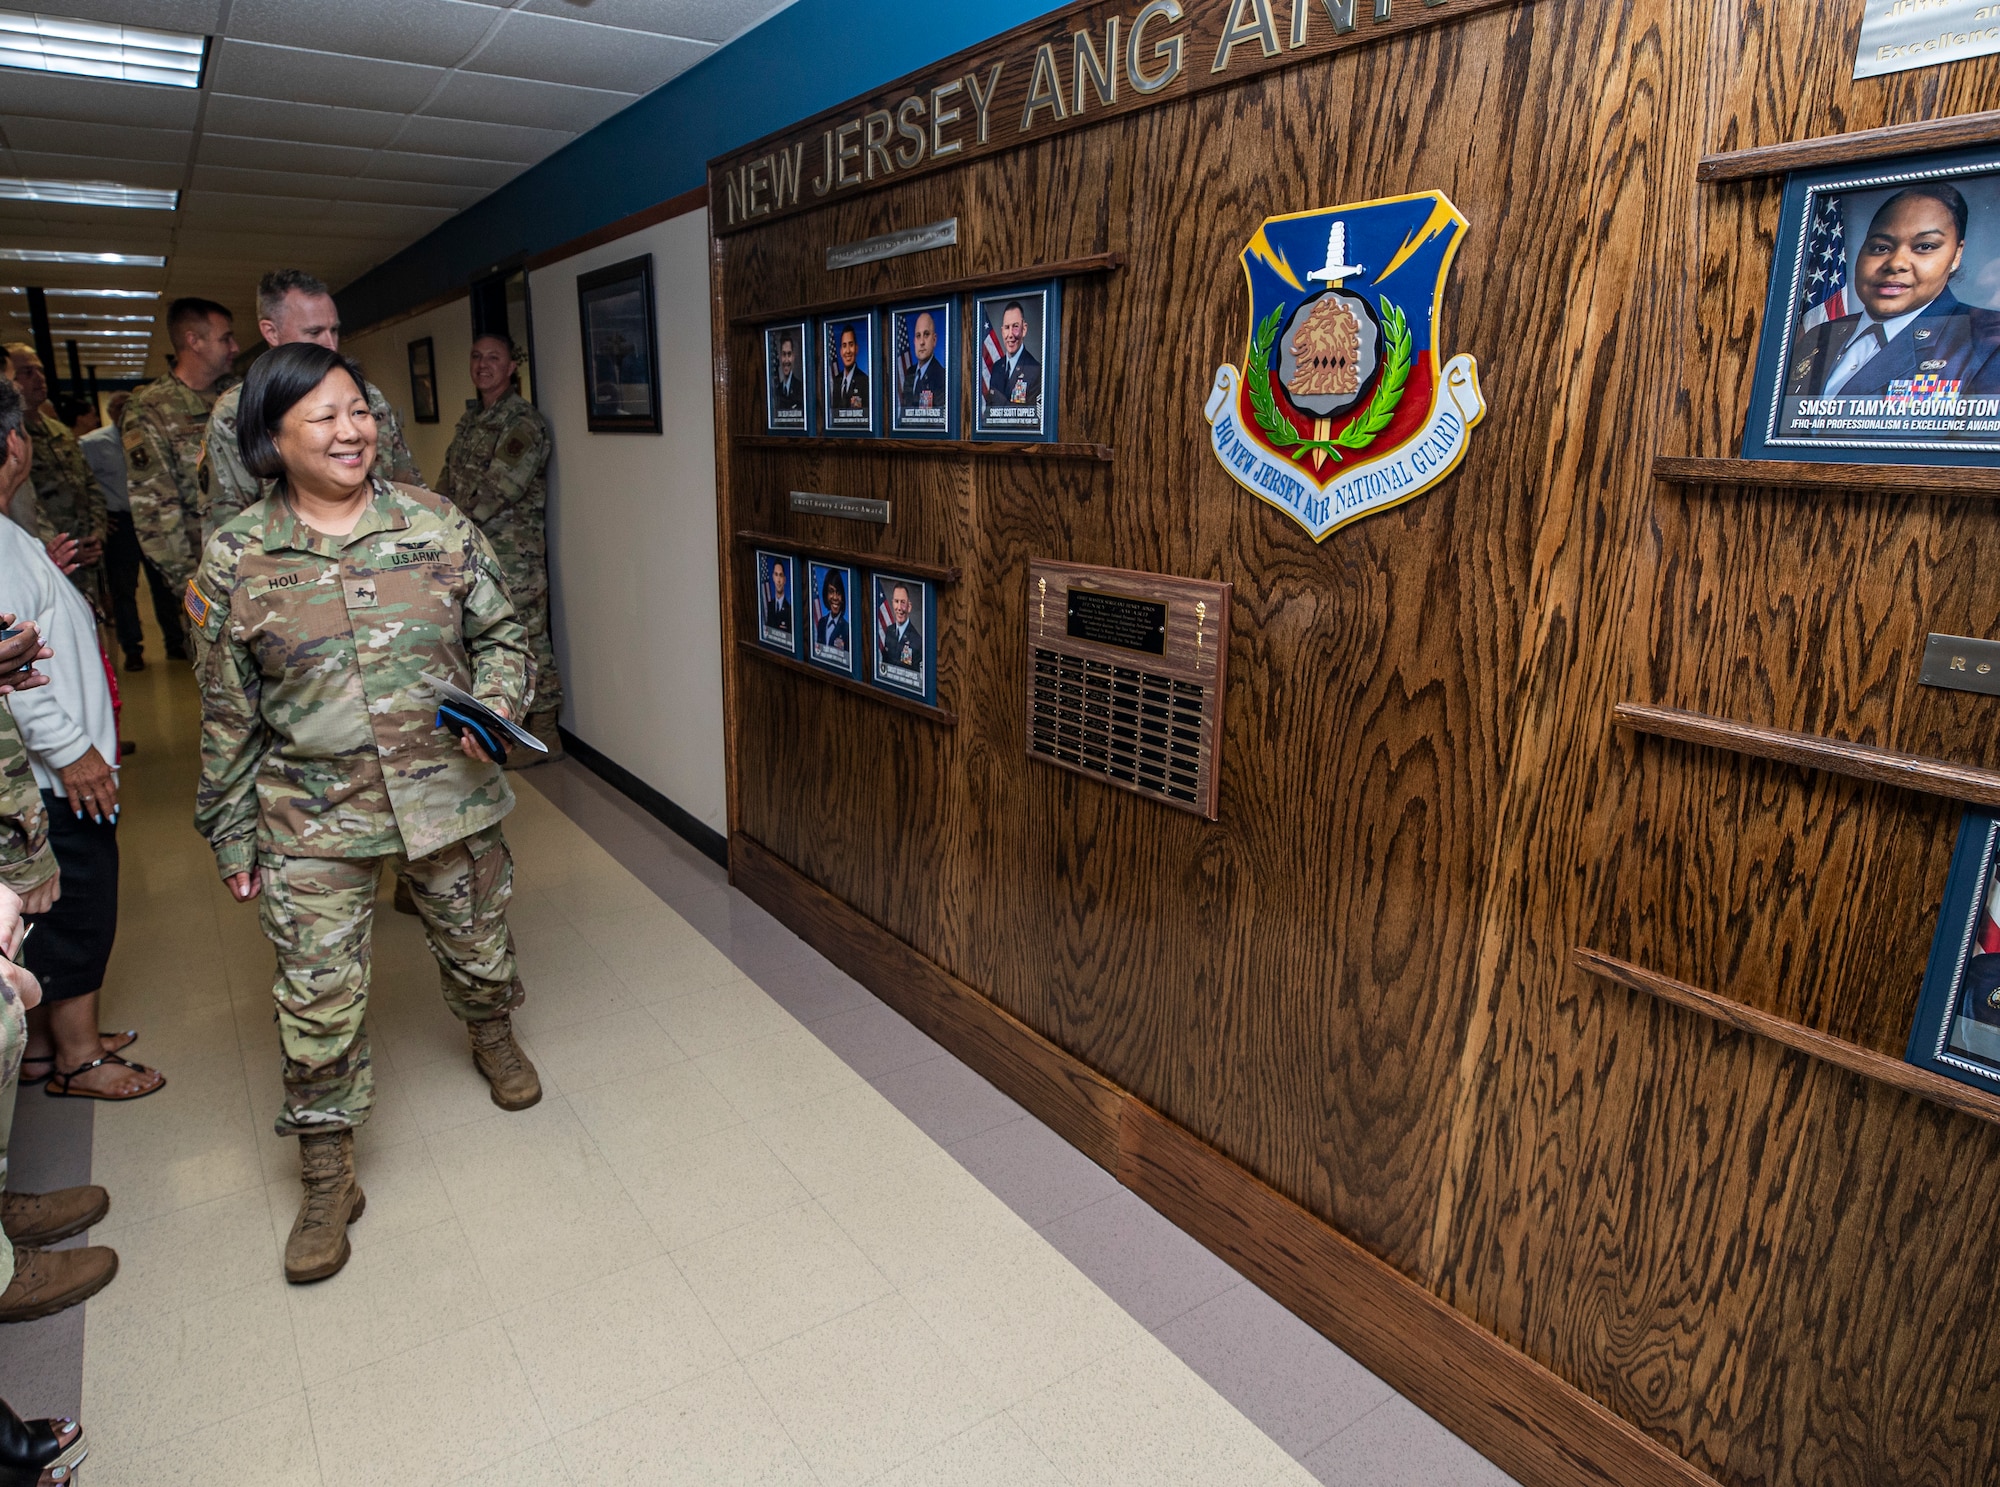 U.S. Army Brig. Gen. Lisa Hou, D.O., the Adjutant General of New Jersey, and Commissioner of the New Jersey Department of Military and Veterans Affairs looks at the New Jersey Air National Guard's Awards Wall during its unveiling on June 22, 2022.